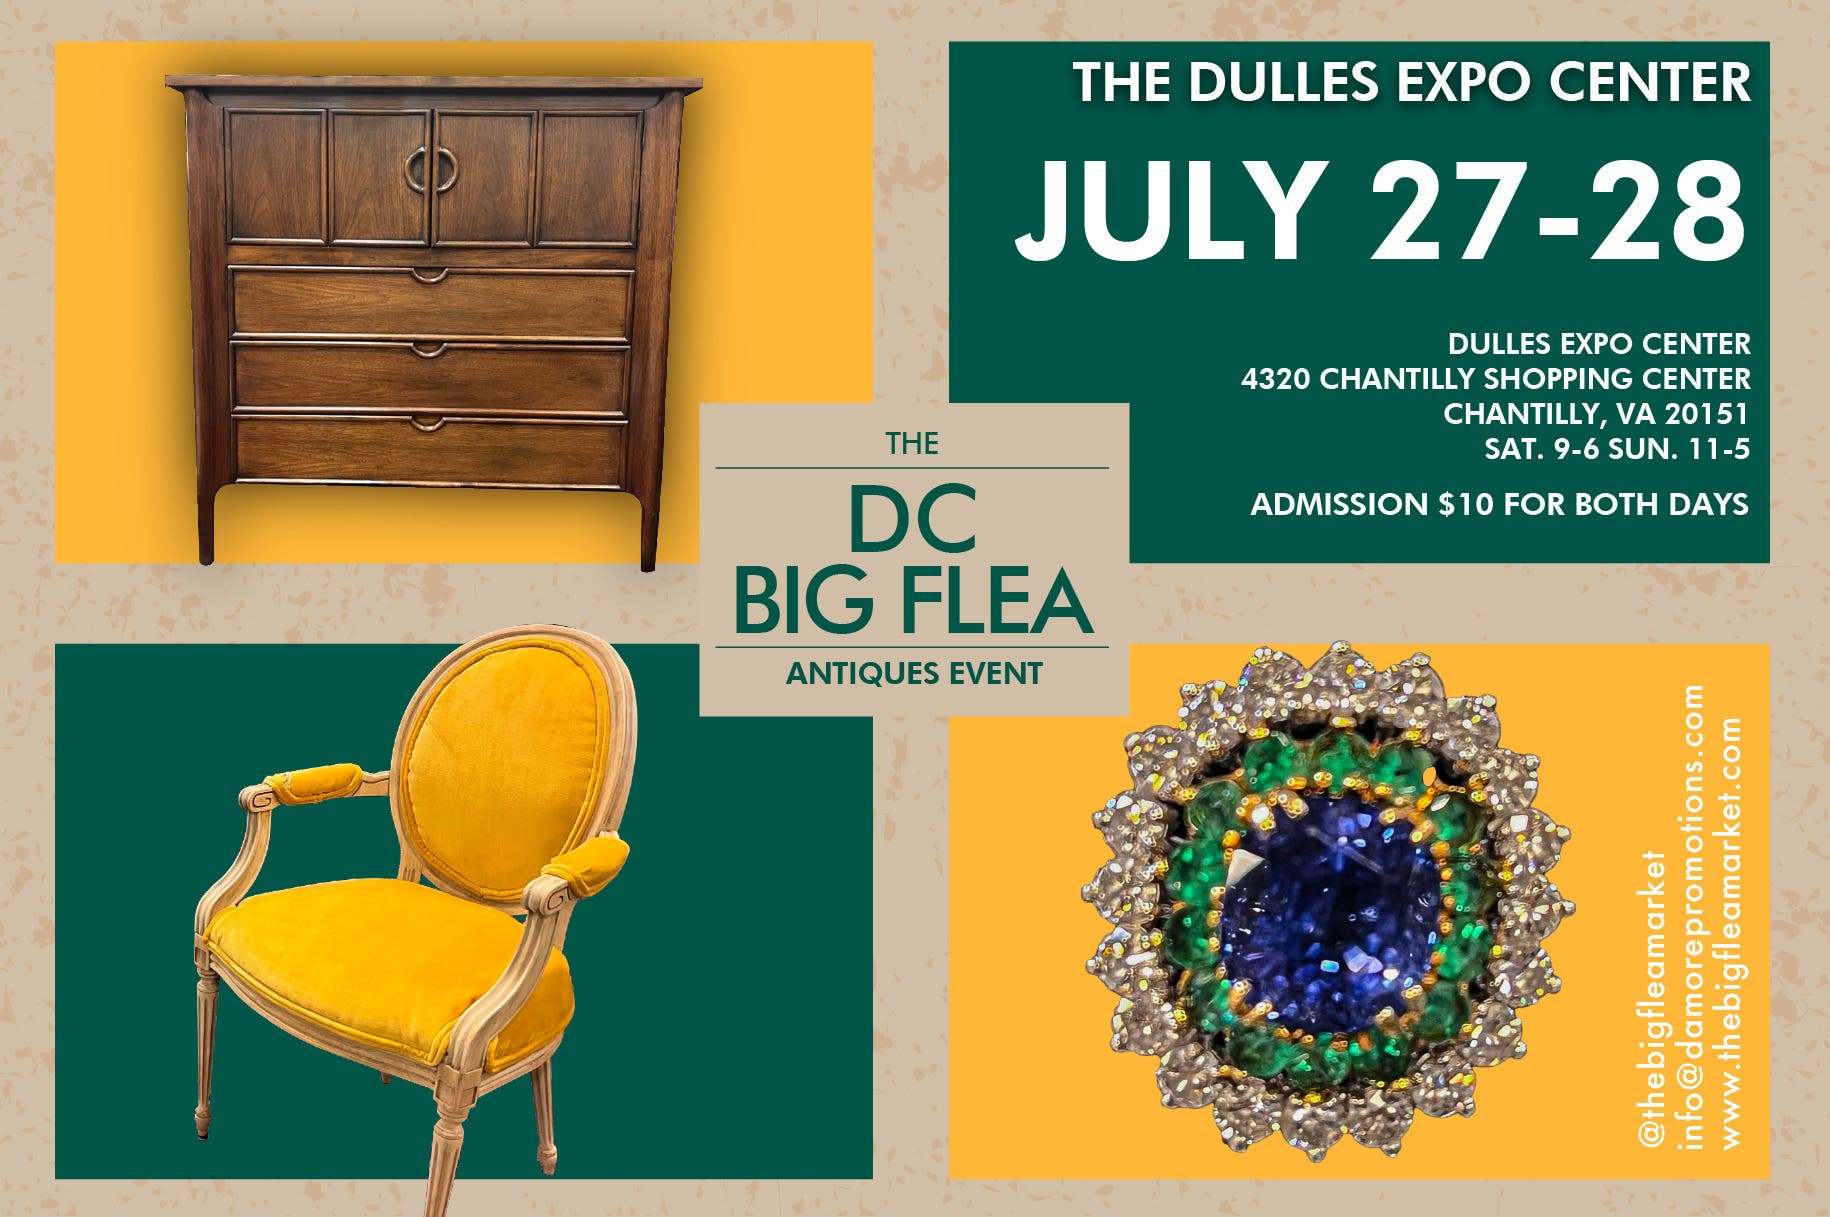 The DC Big Flea returns July 27-28th to the Dulles Expo Center 